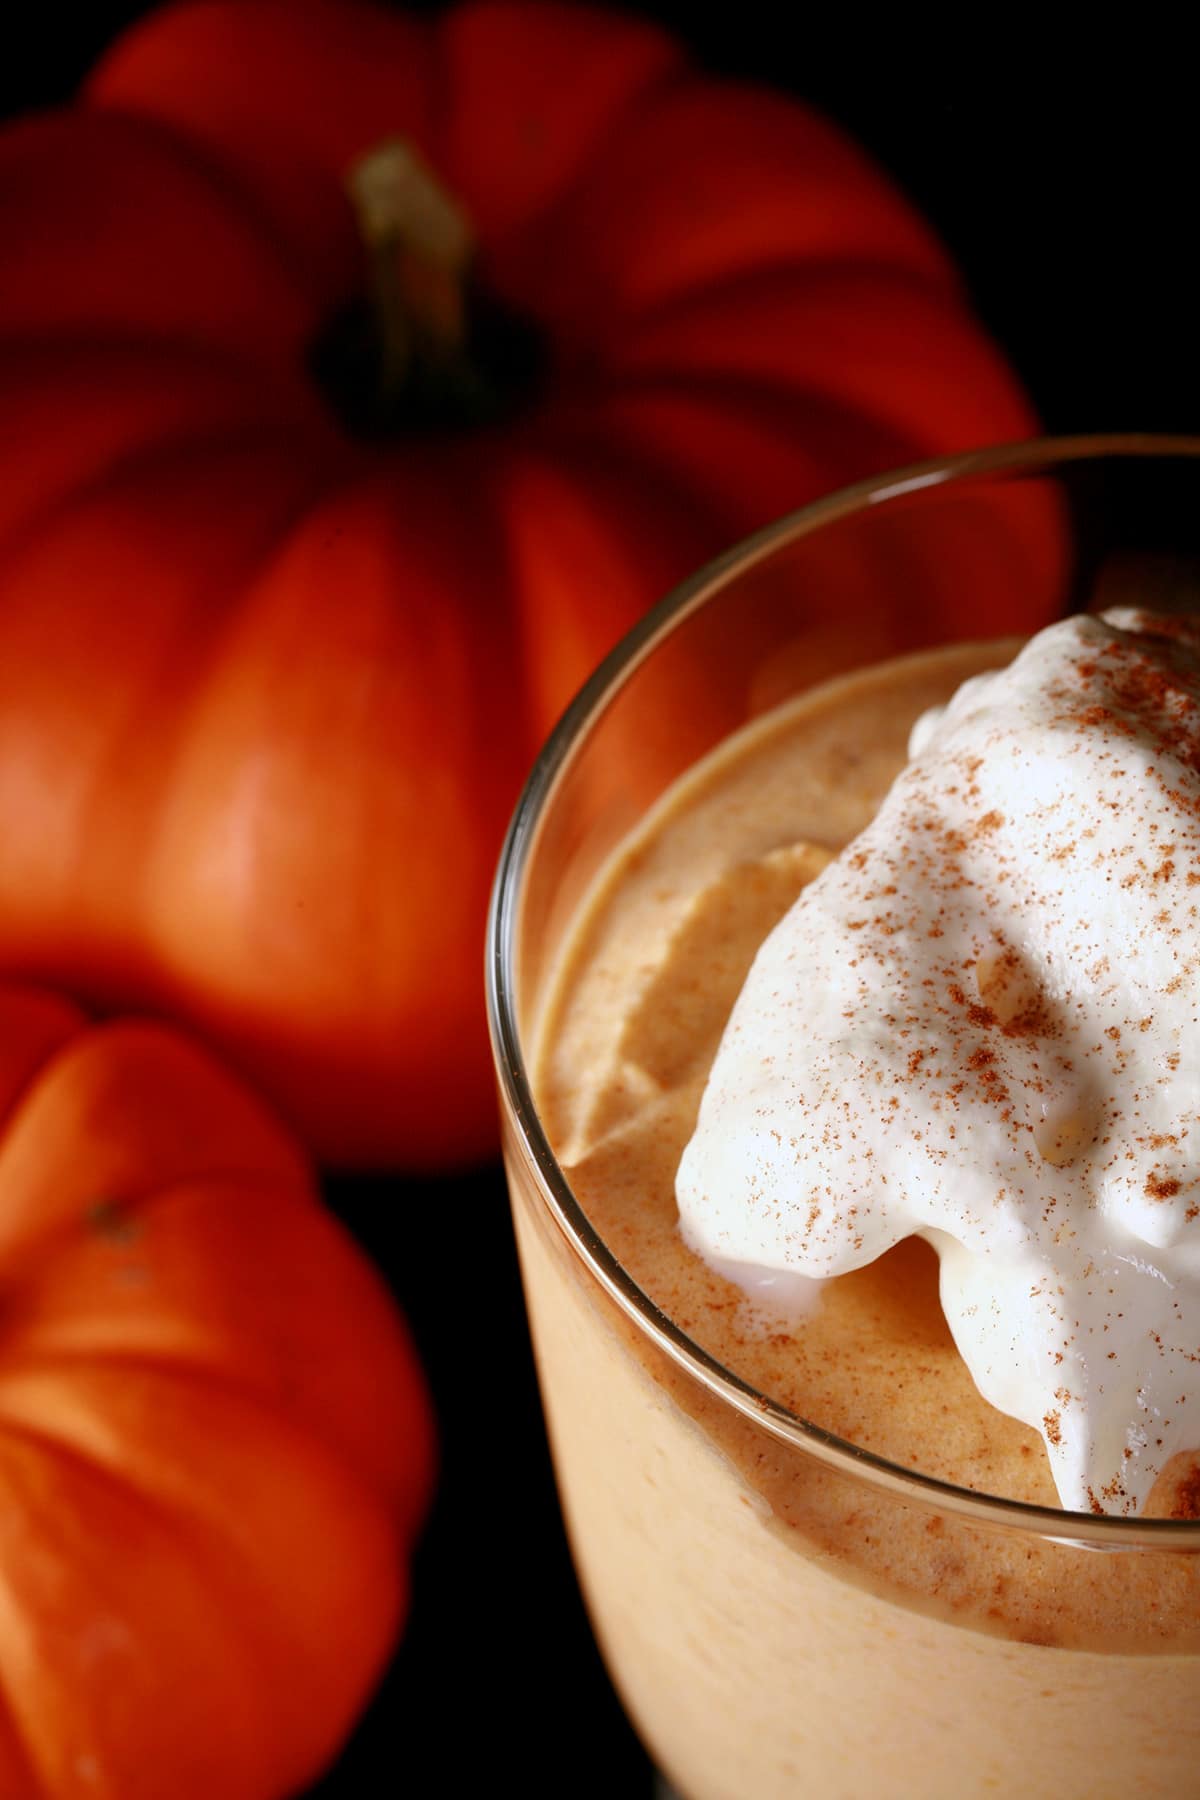 Close up photo of a glass of maple pumpkin mousse. There is whipped cream and a sprinkle of cinnamon on top.